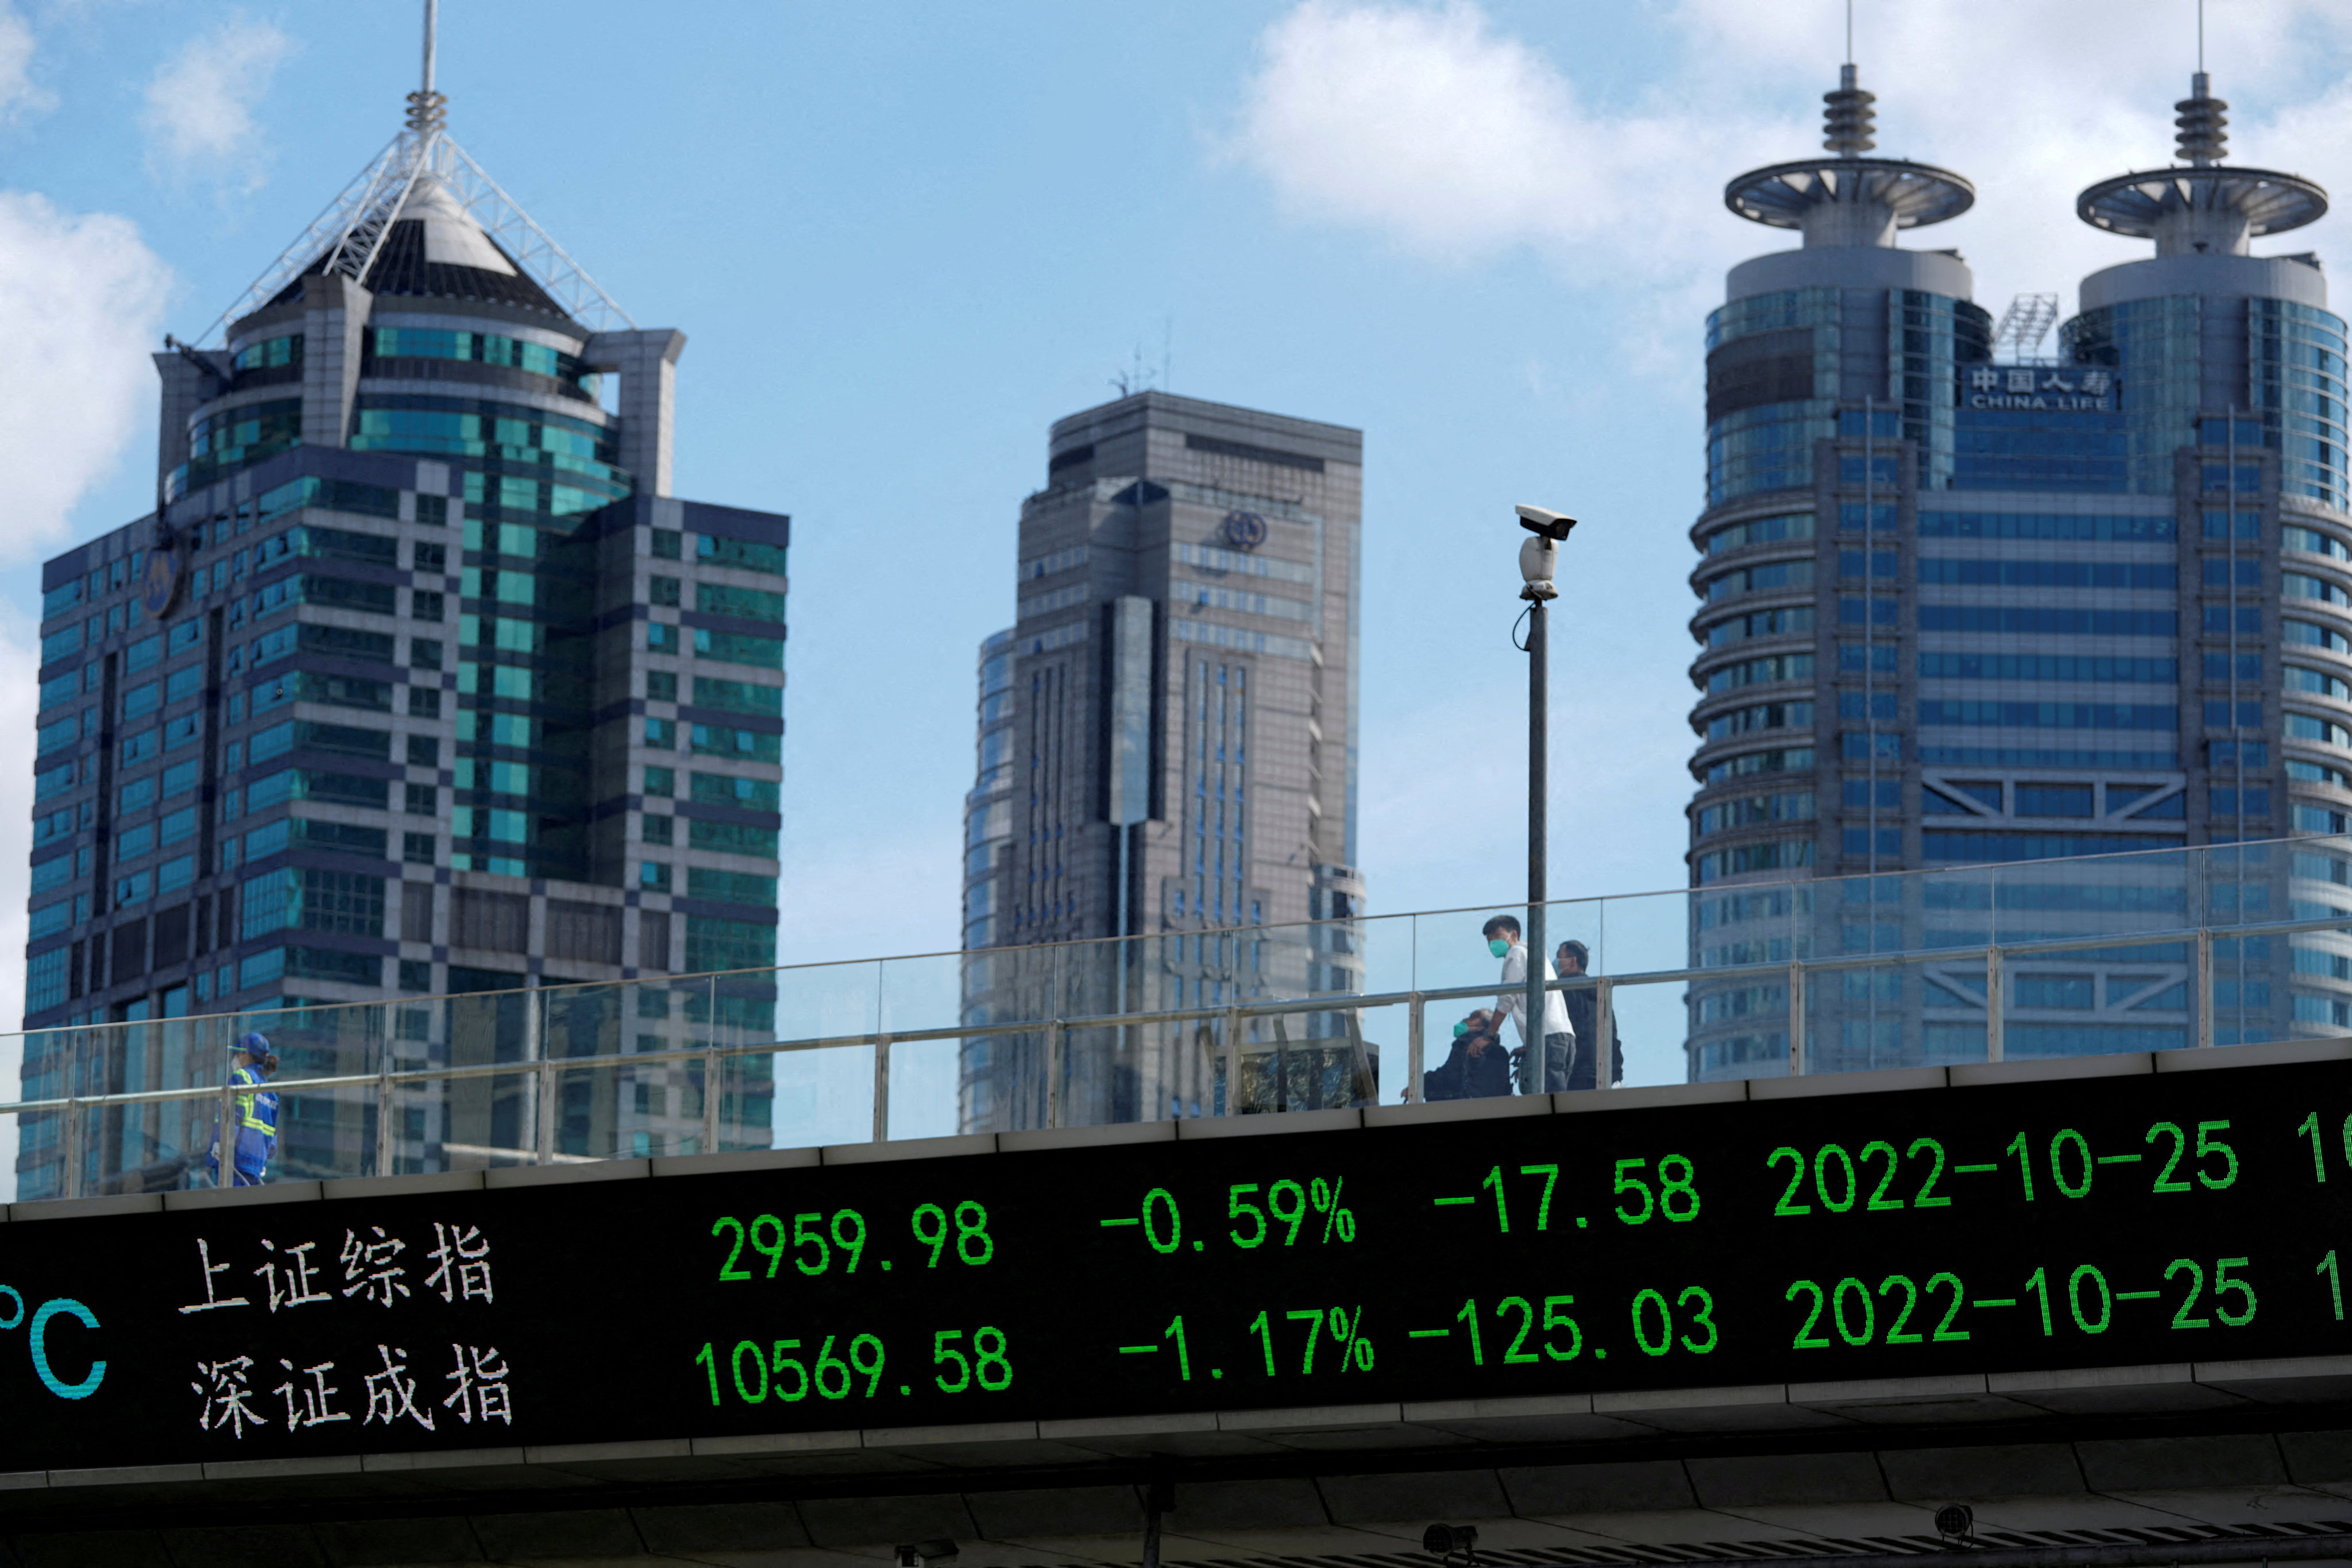 Money managers are reducing their exposure to China and using any market rallies as an opportunity to sell, says Alpine Macro strategist. Photo: Reuters